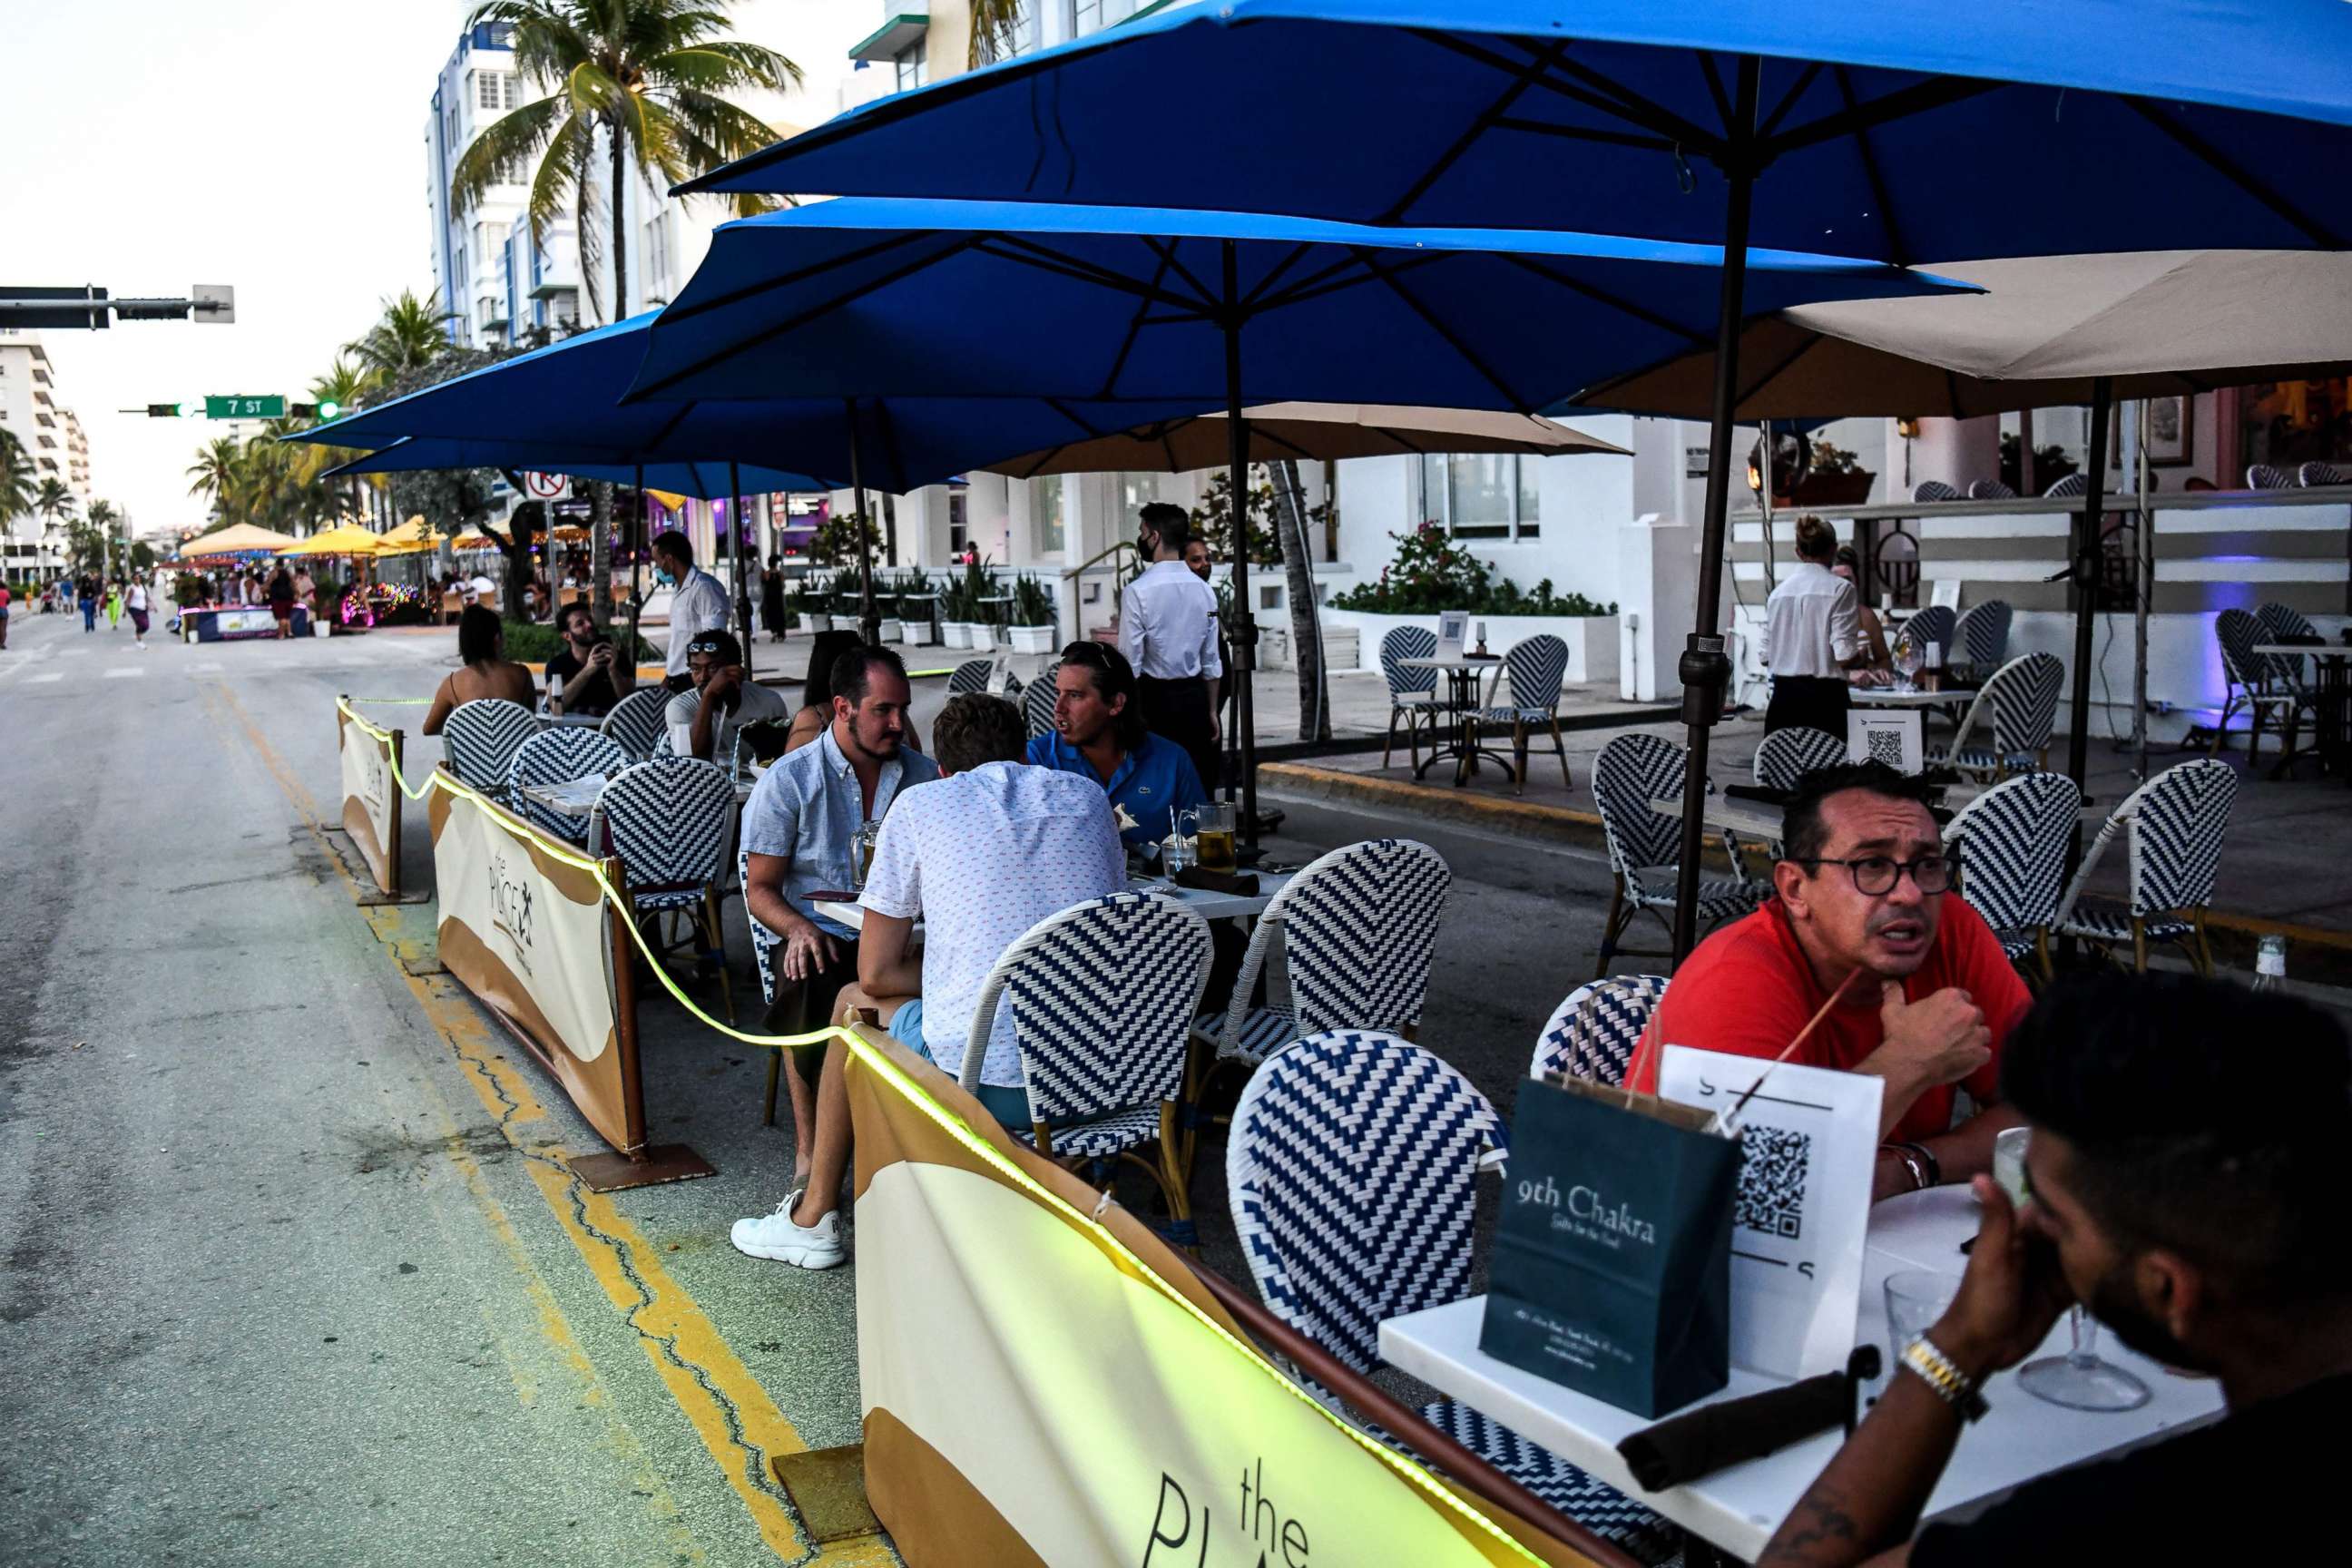 PHOTO: People eat in the outdoor dining area of a restaurant on Ocean Drive in Miami Beach, Florida on June 24, 2020.